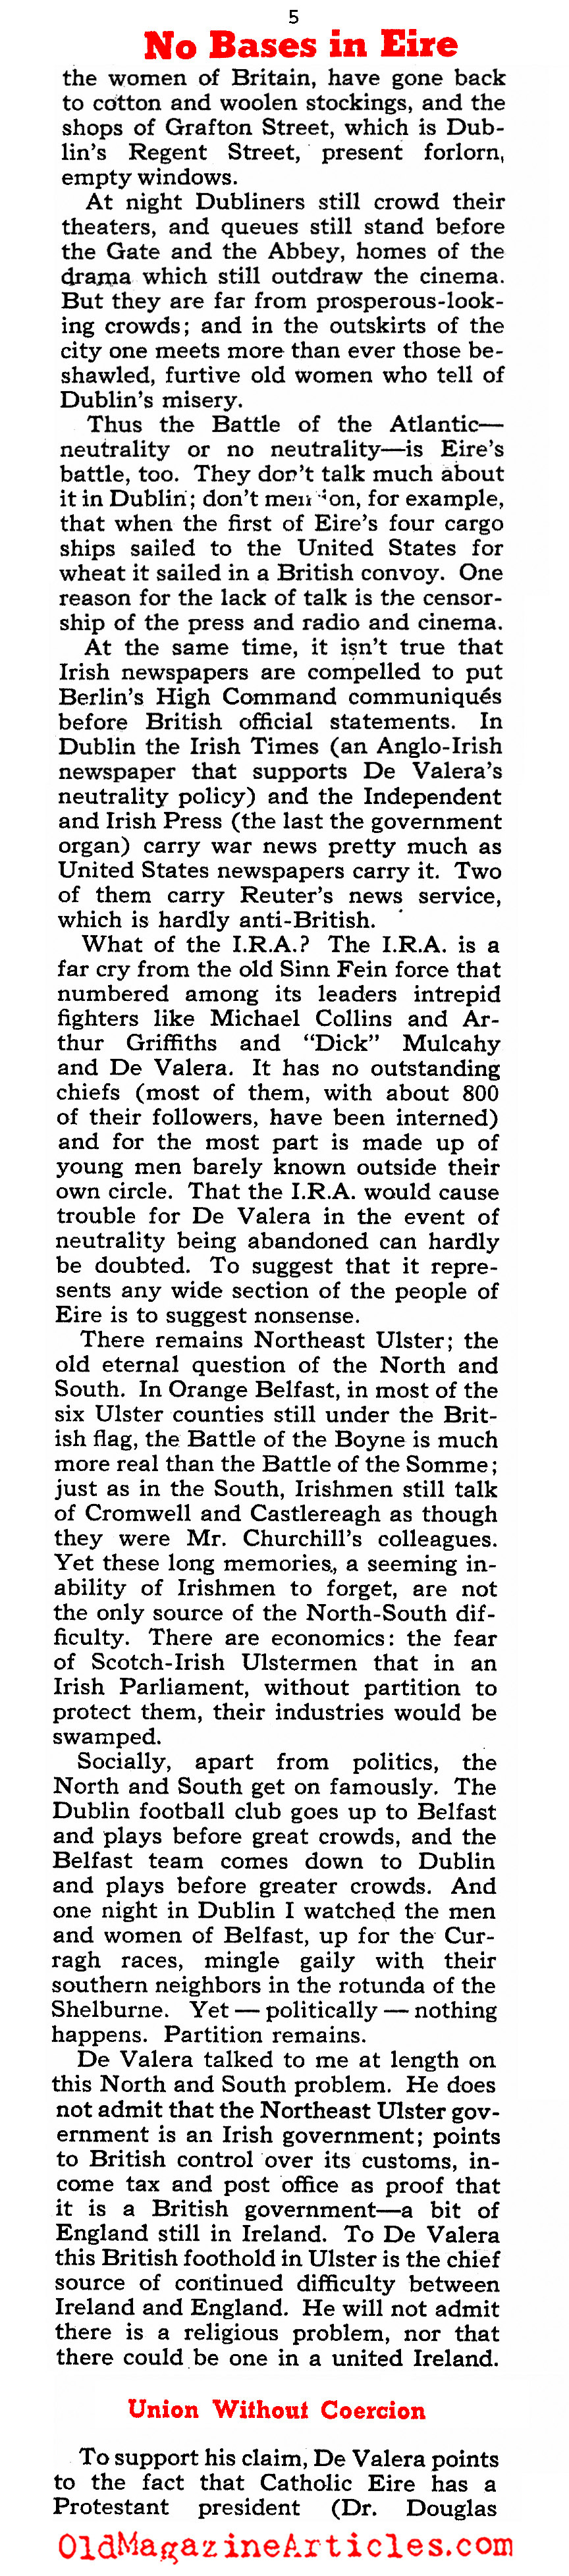 Ireland Bows Out of the War (Collier's Magazine, 1942)